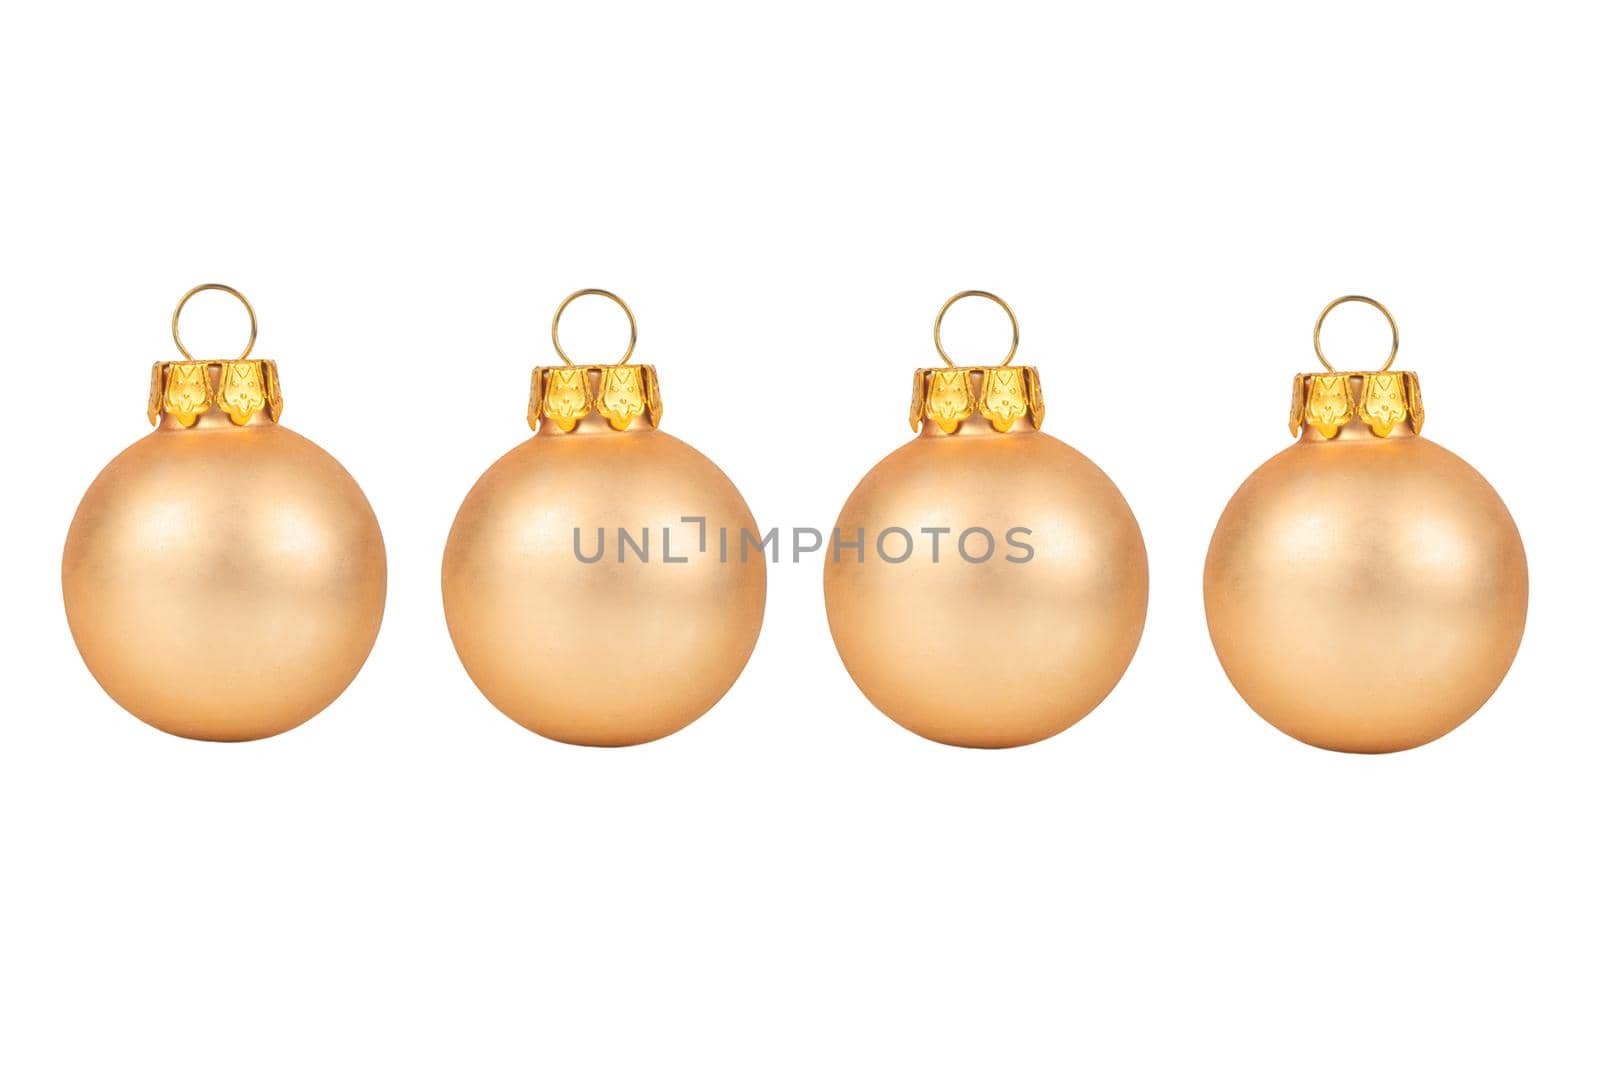 Four beige Christmas balls isolated on white background